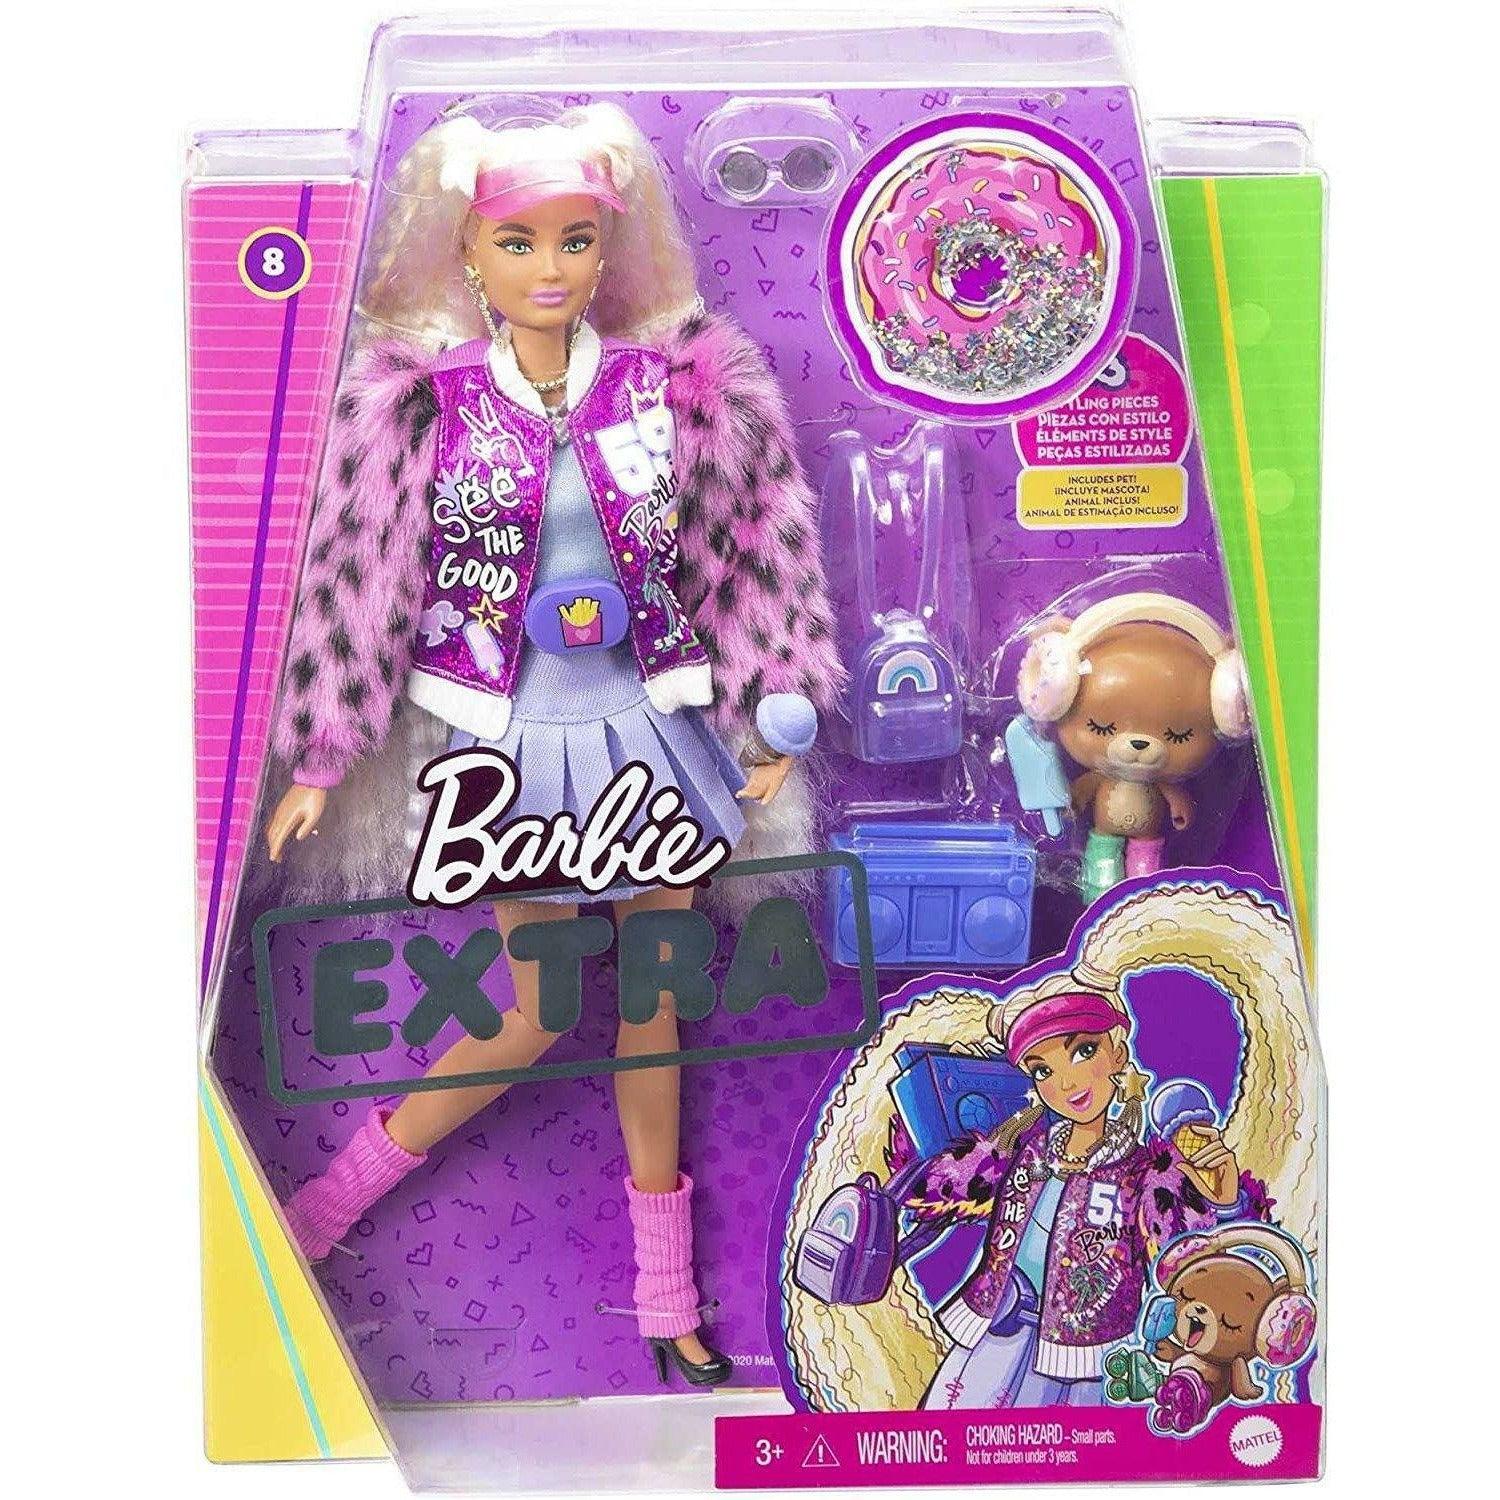 Barbie Extra Doll #8 in Pink Sparkly Varsity Jacket with Furry Arms & Pet Teddy Bear - BumbleToys - 5-7 Years, Barbie, Fashion Dolls & Accessories, Girls, OXE, Pre-Order